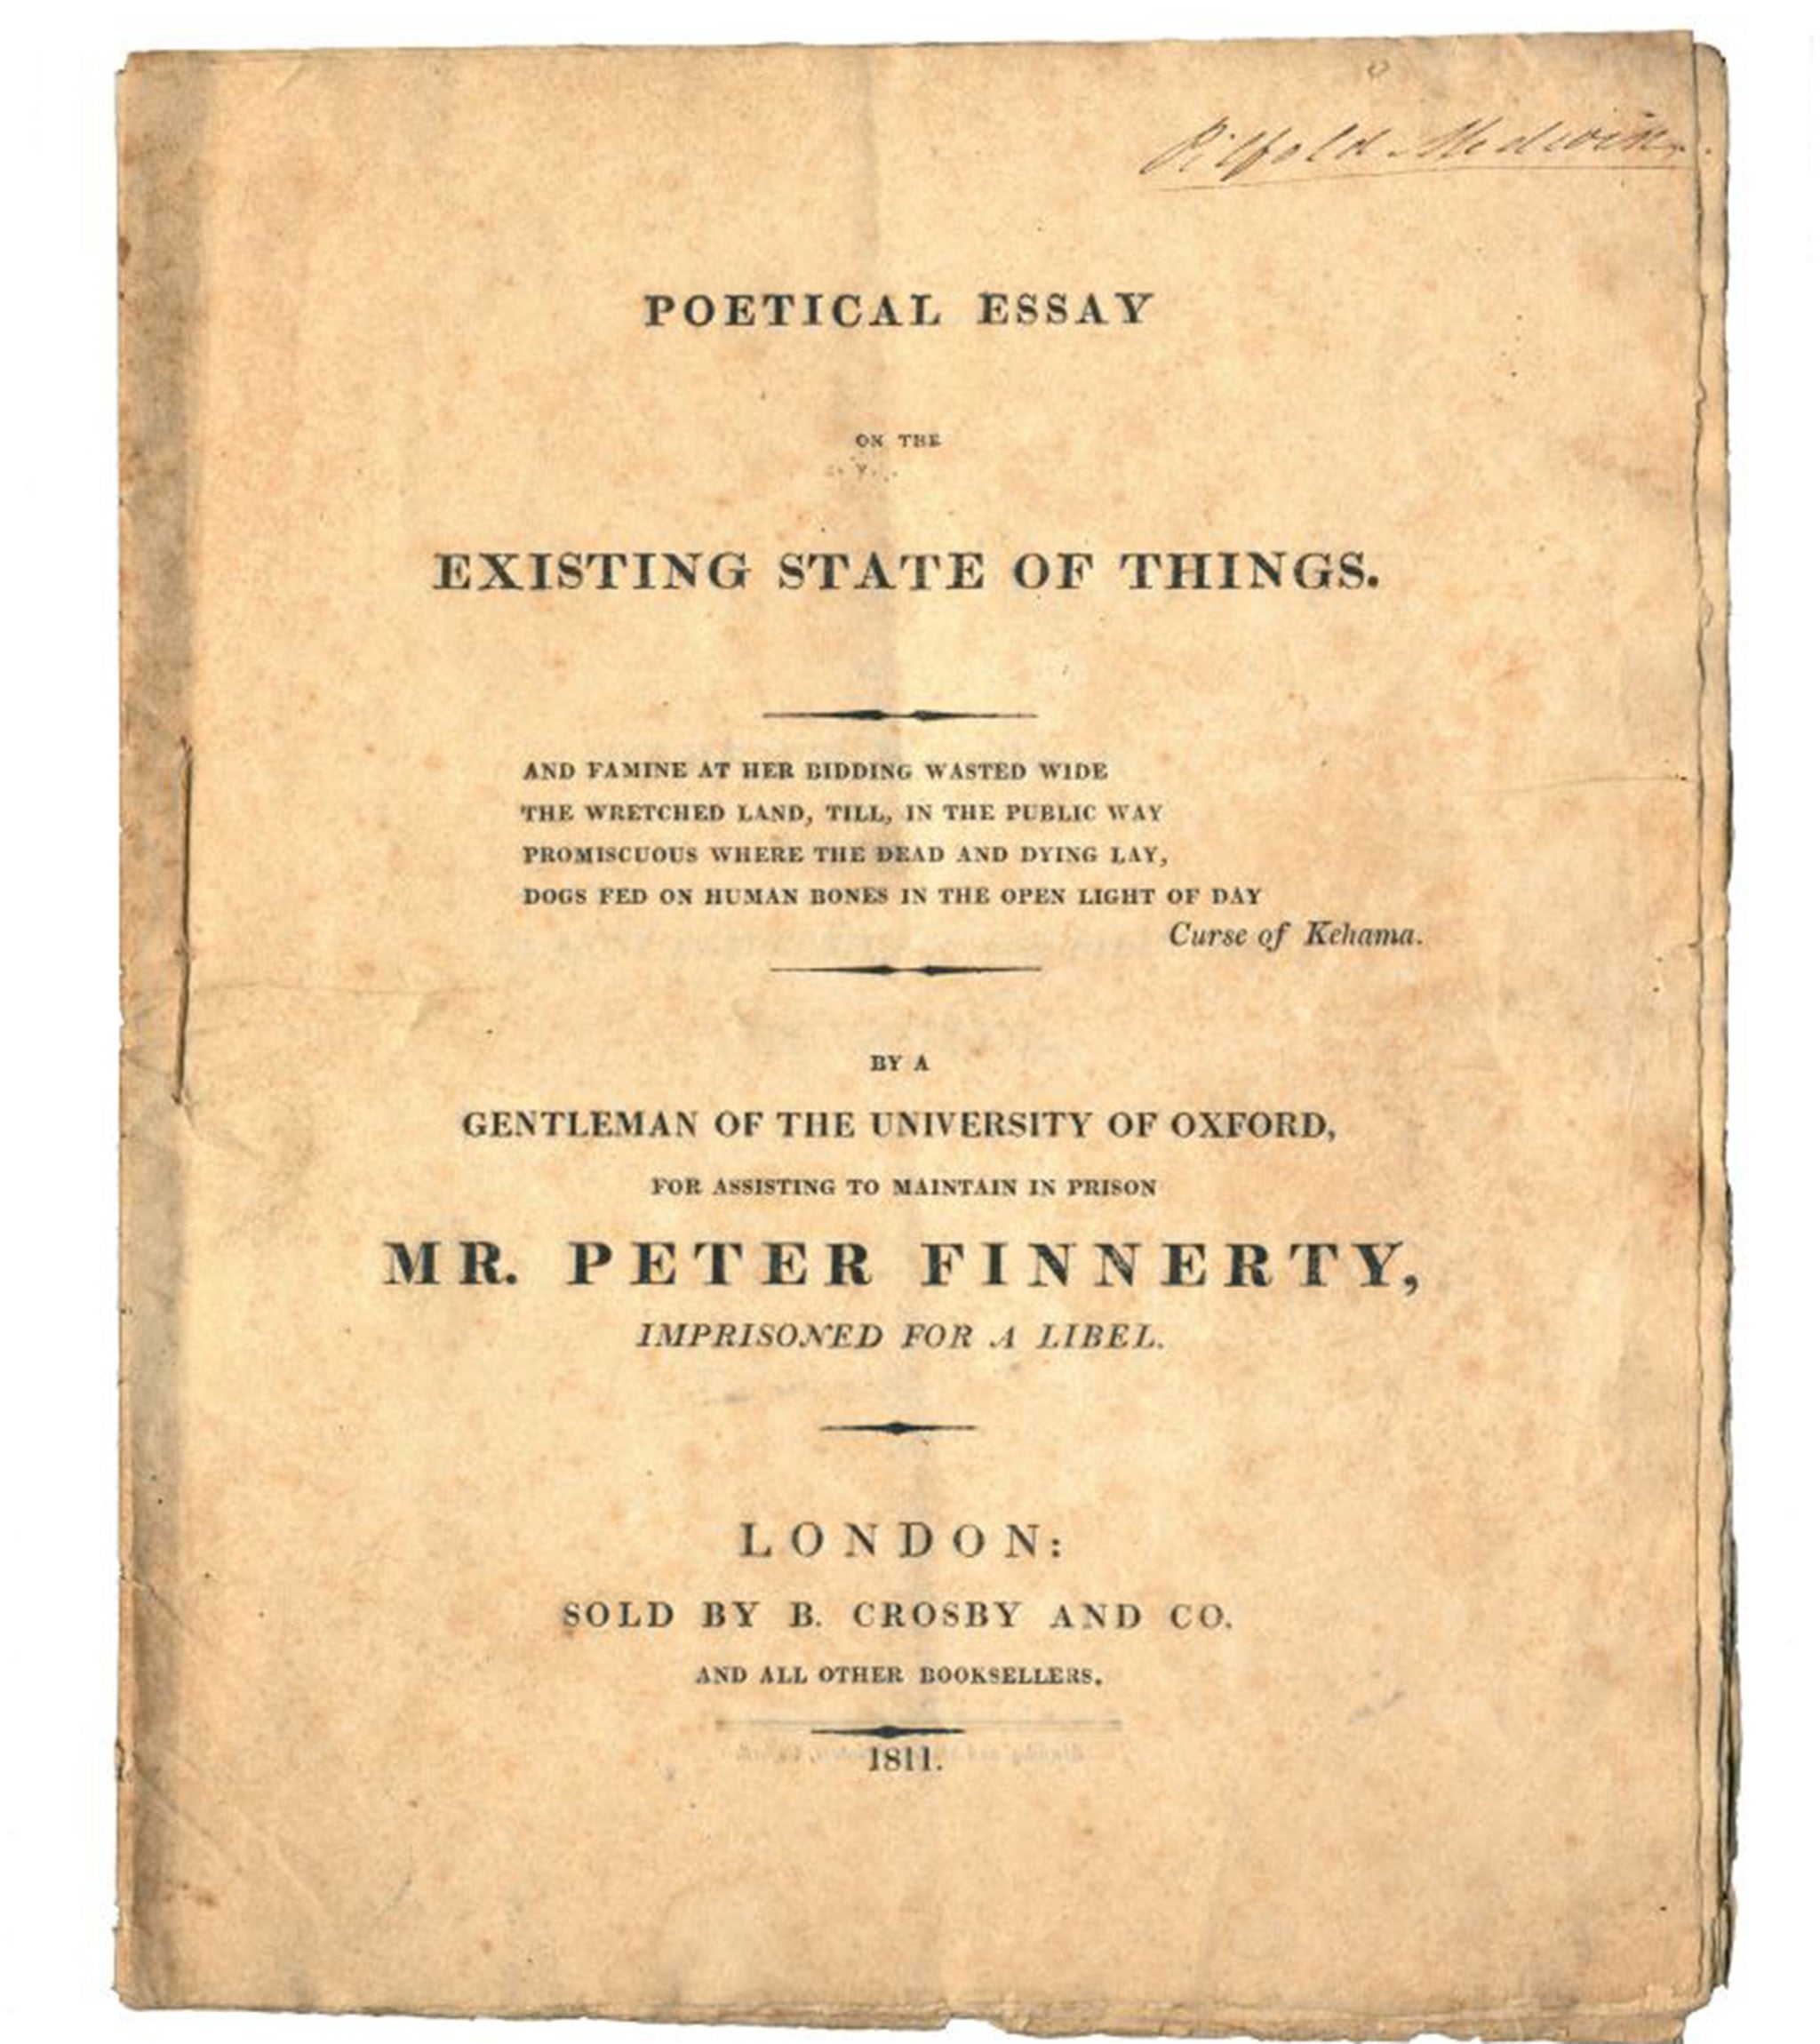 The front cover of A Poetical Essay by Percy Bysshe Shelley, as the lost poem by the English Romantic has become the 12 millionth book in the UK's largest academic library service.